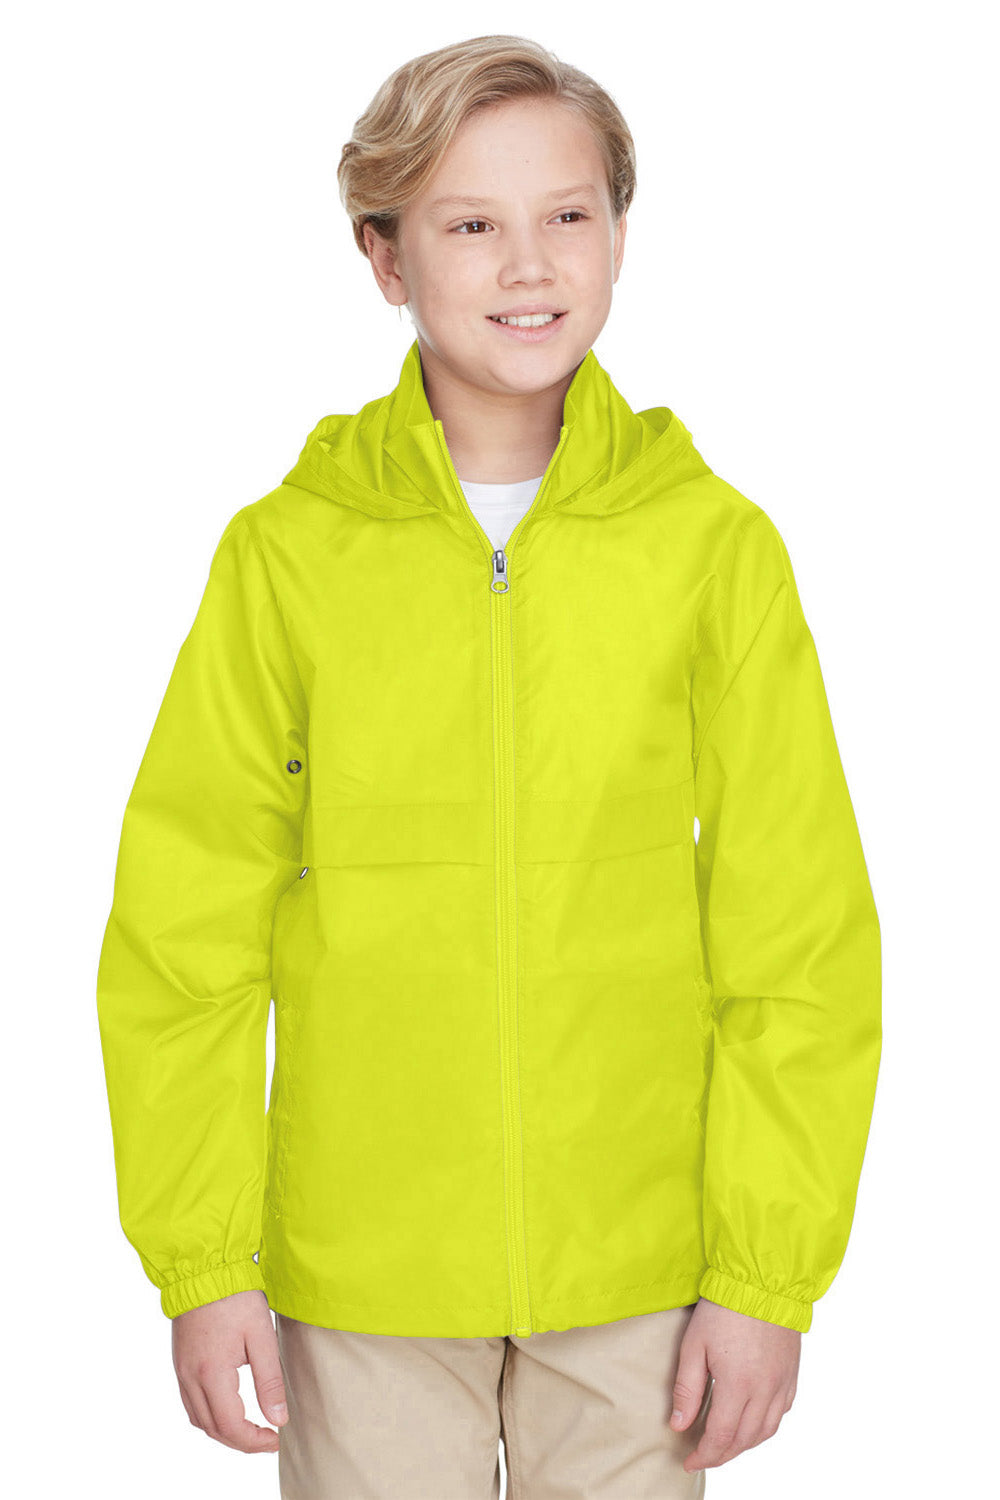 Team 365 TT73Y Youth Zone Protect Water Resistant Full Zip Hooded Jacket Safety Yellow Front